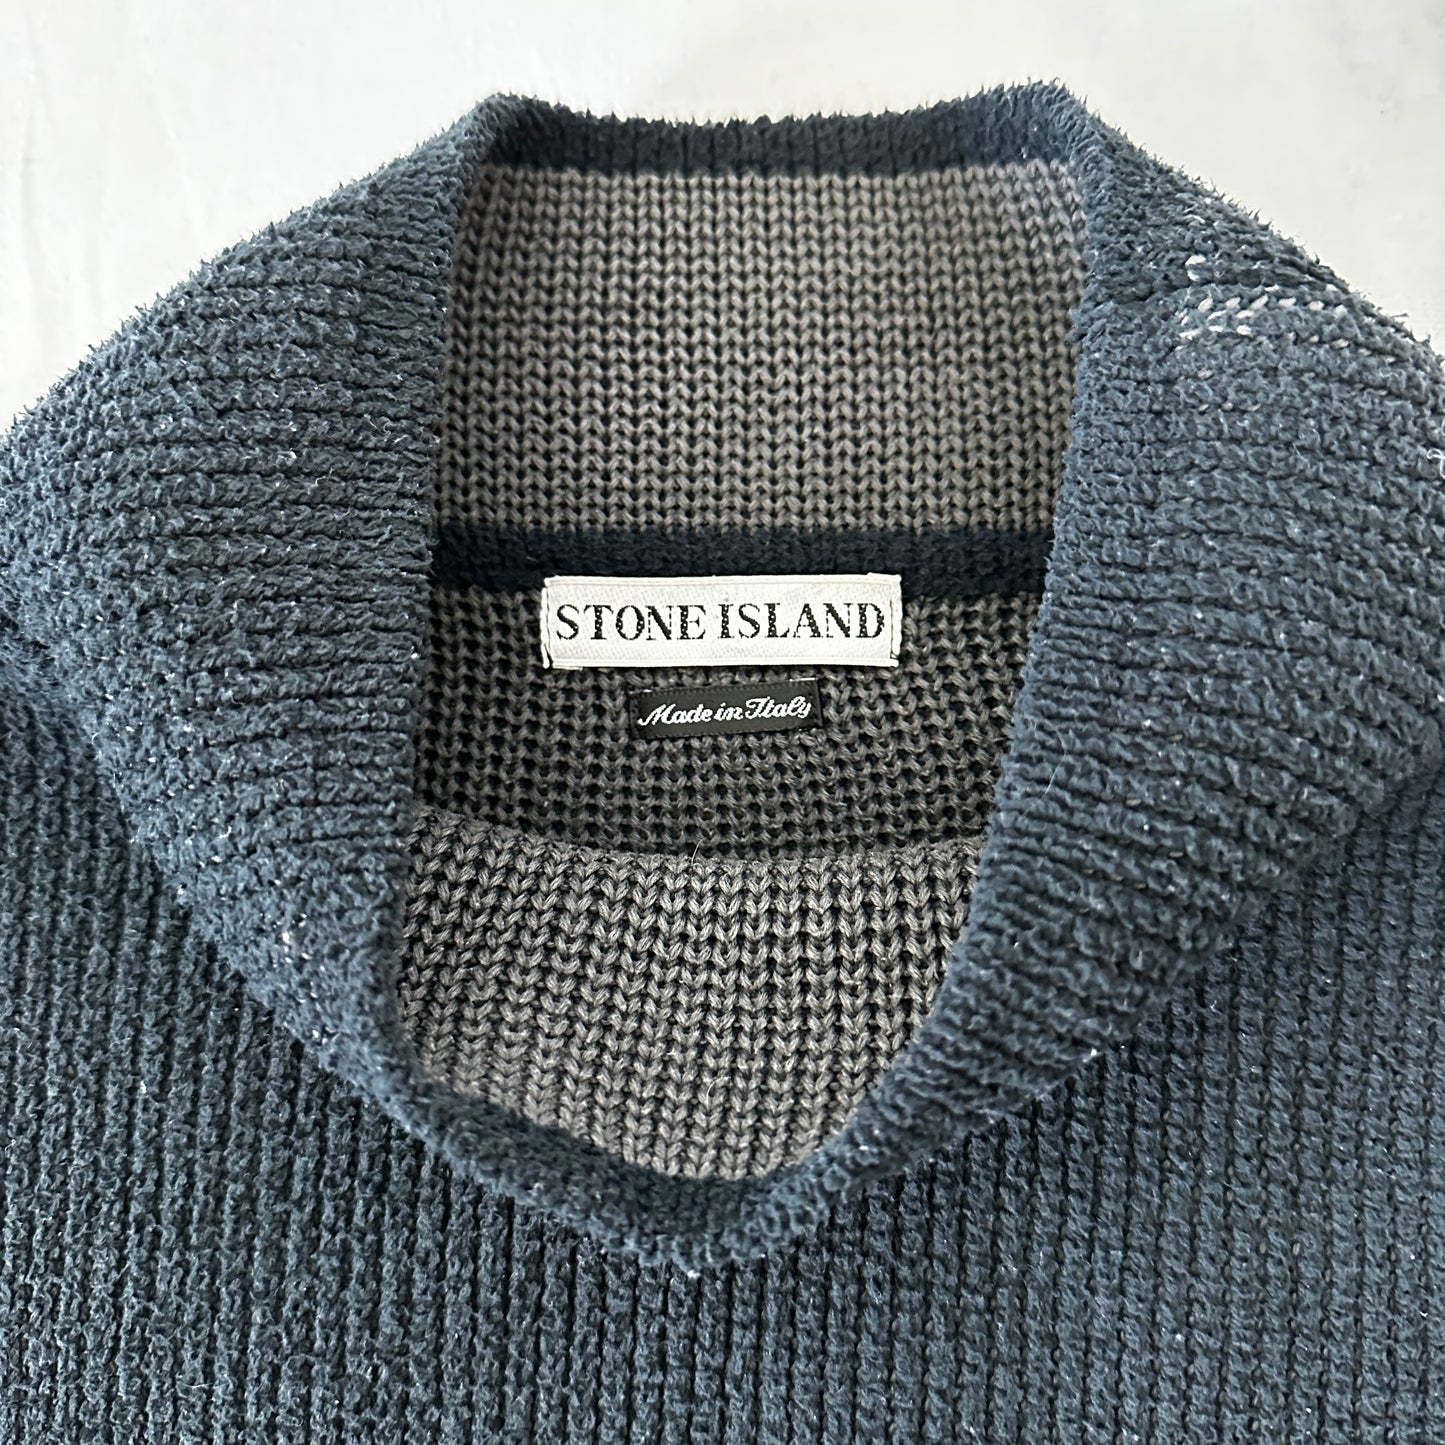 Stone Island 1998 Vintage Turtleneck Knit Sweater - XL - Made in Italy